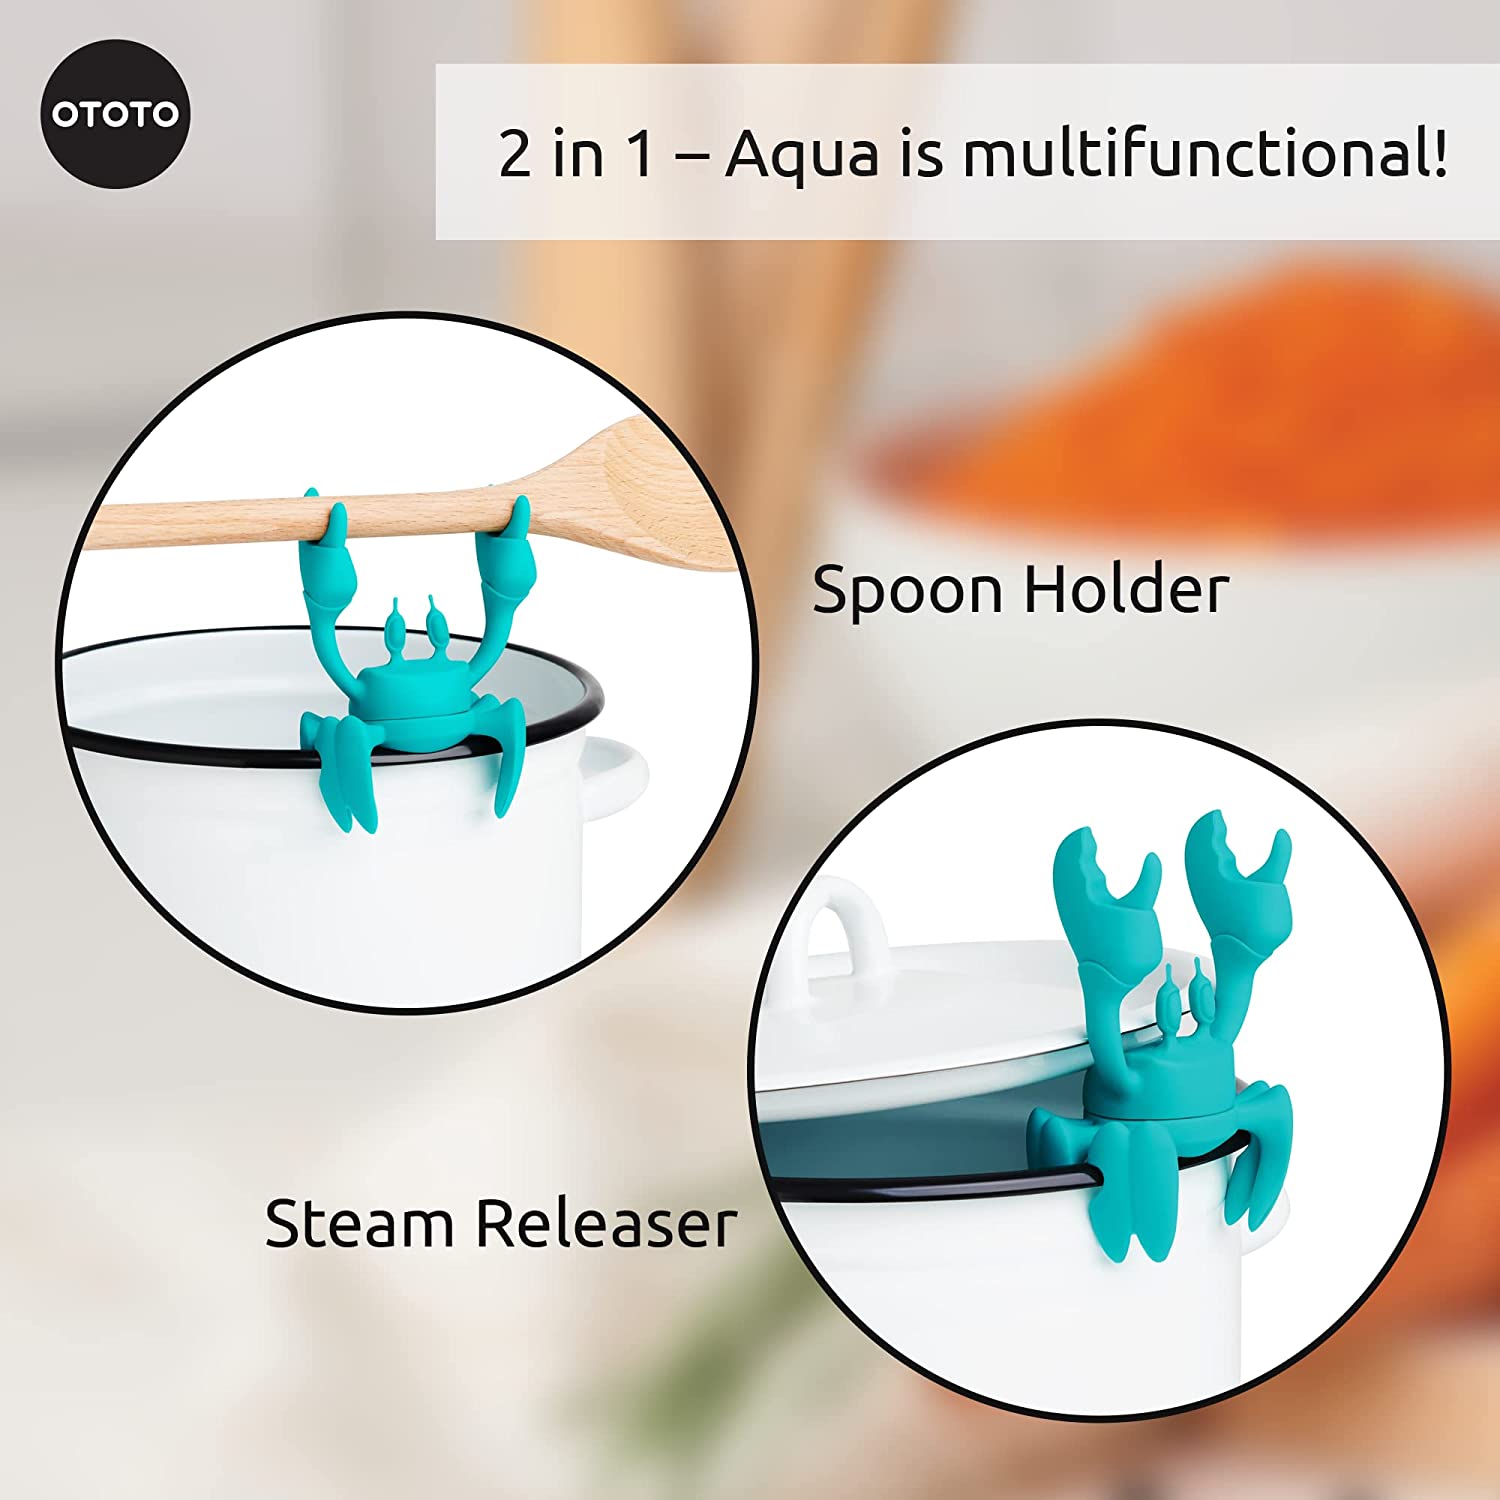 This Adorable Crab Spoon Holder Keeps Your Countertops Clean